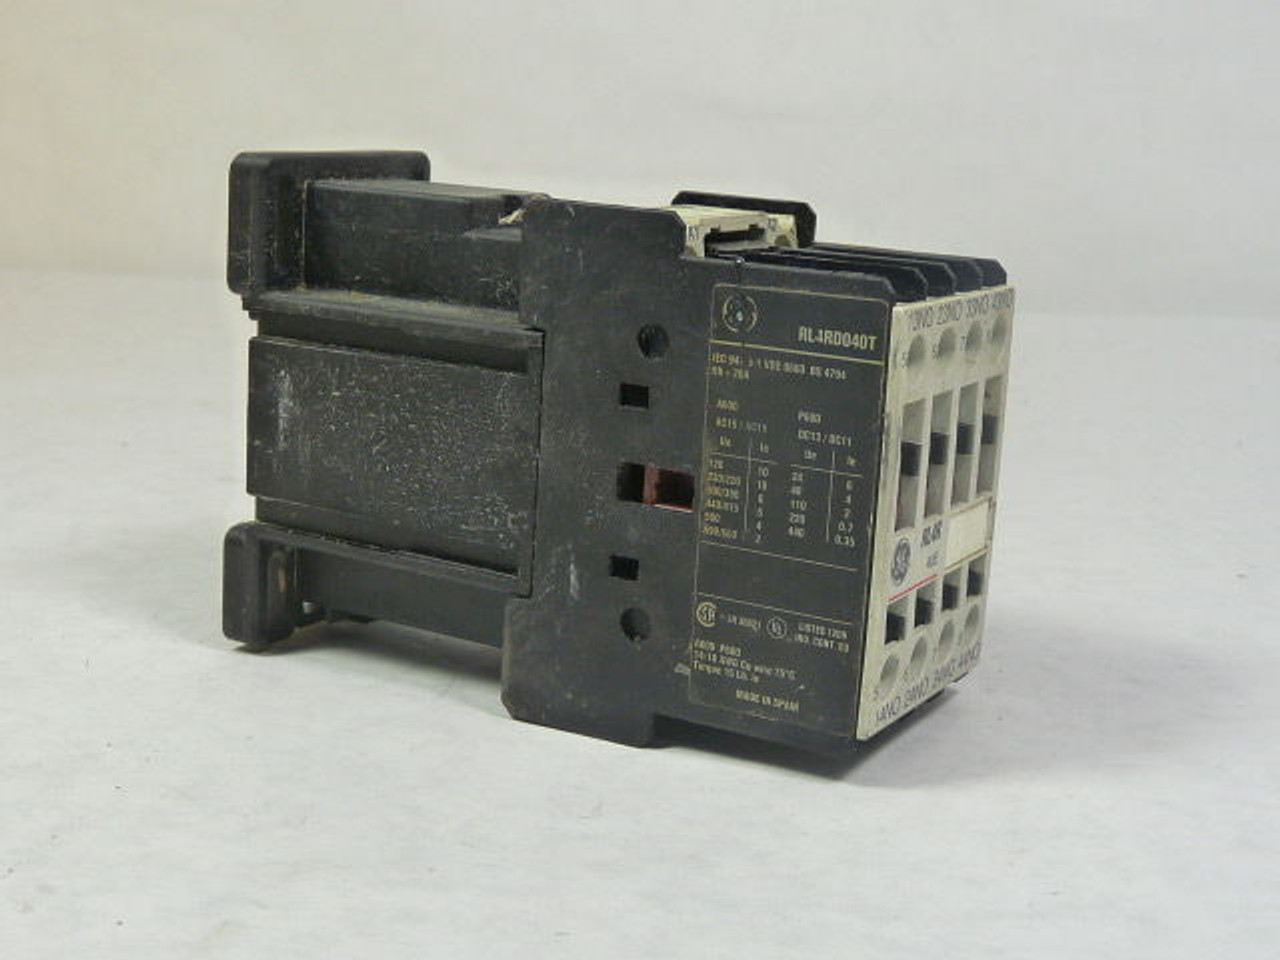 General Electric RL4RD040T Contactor Relay USED